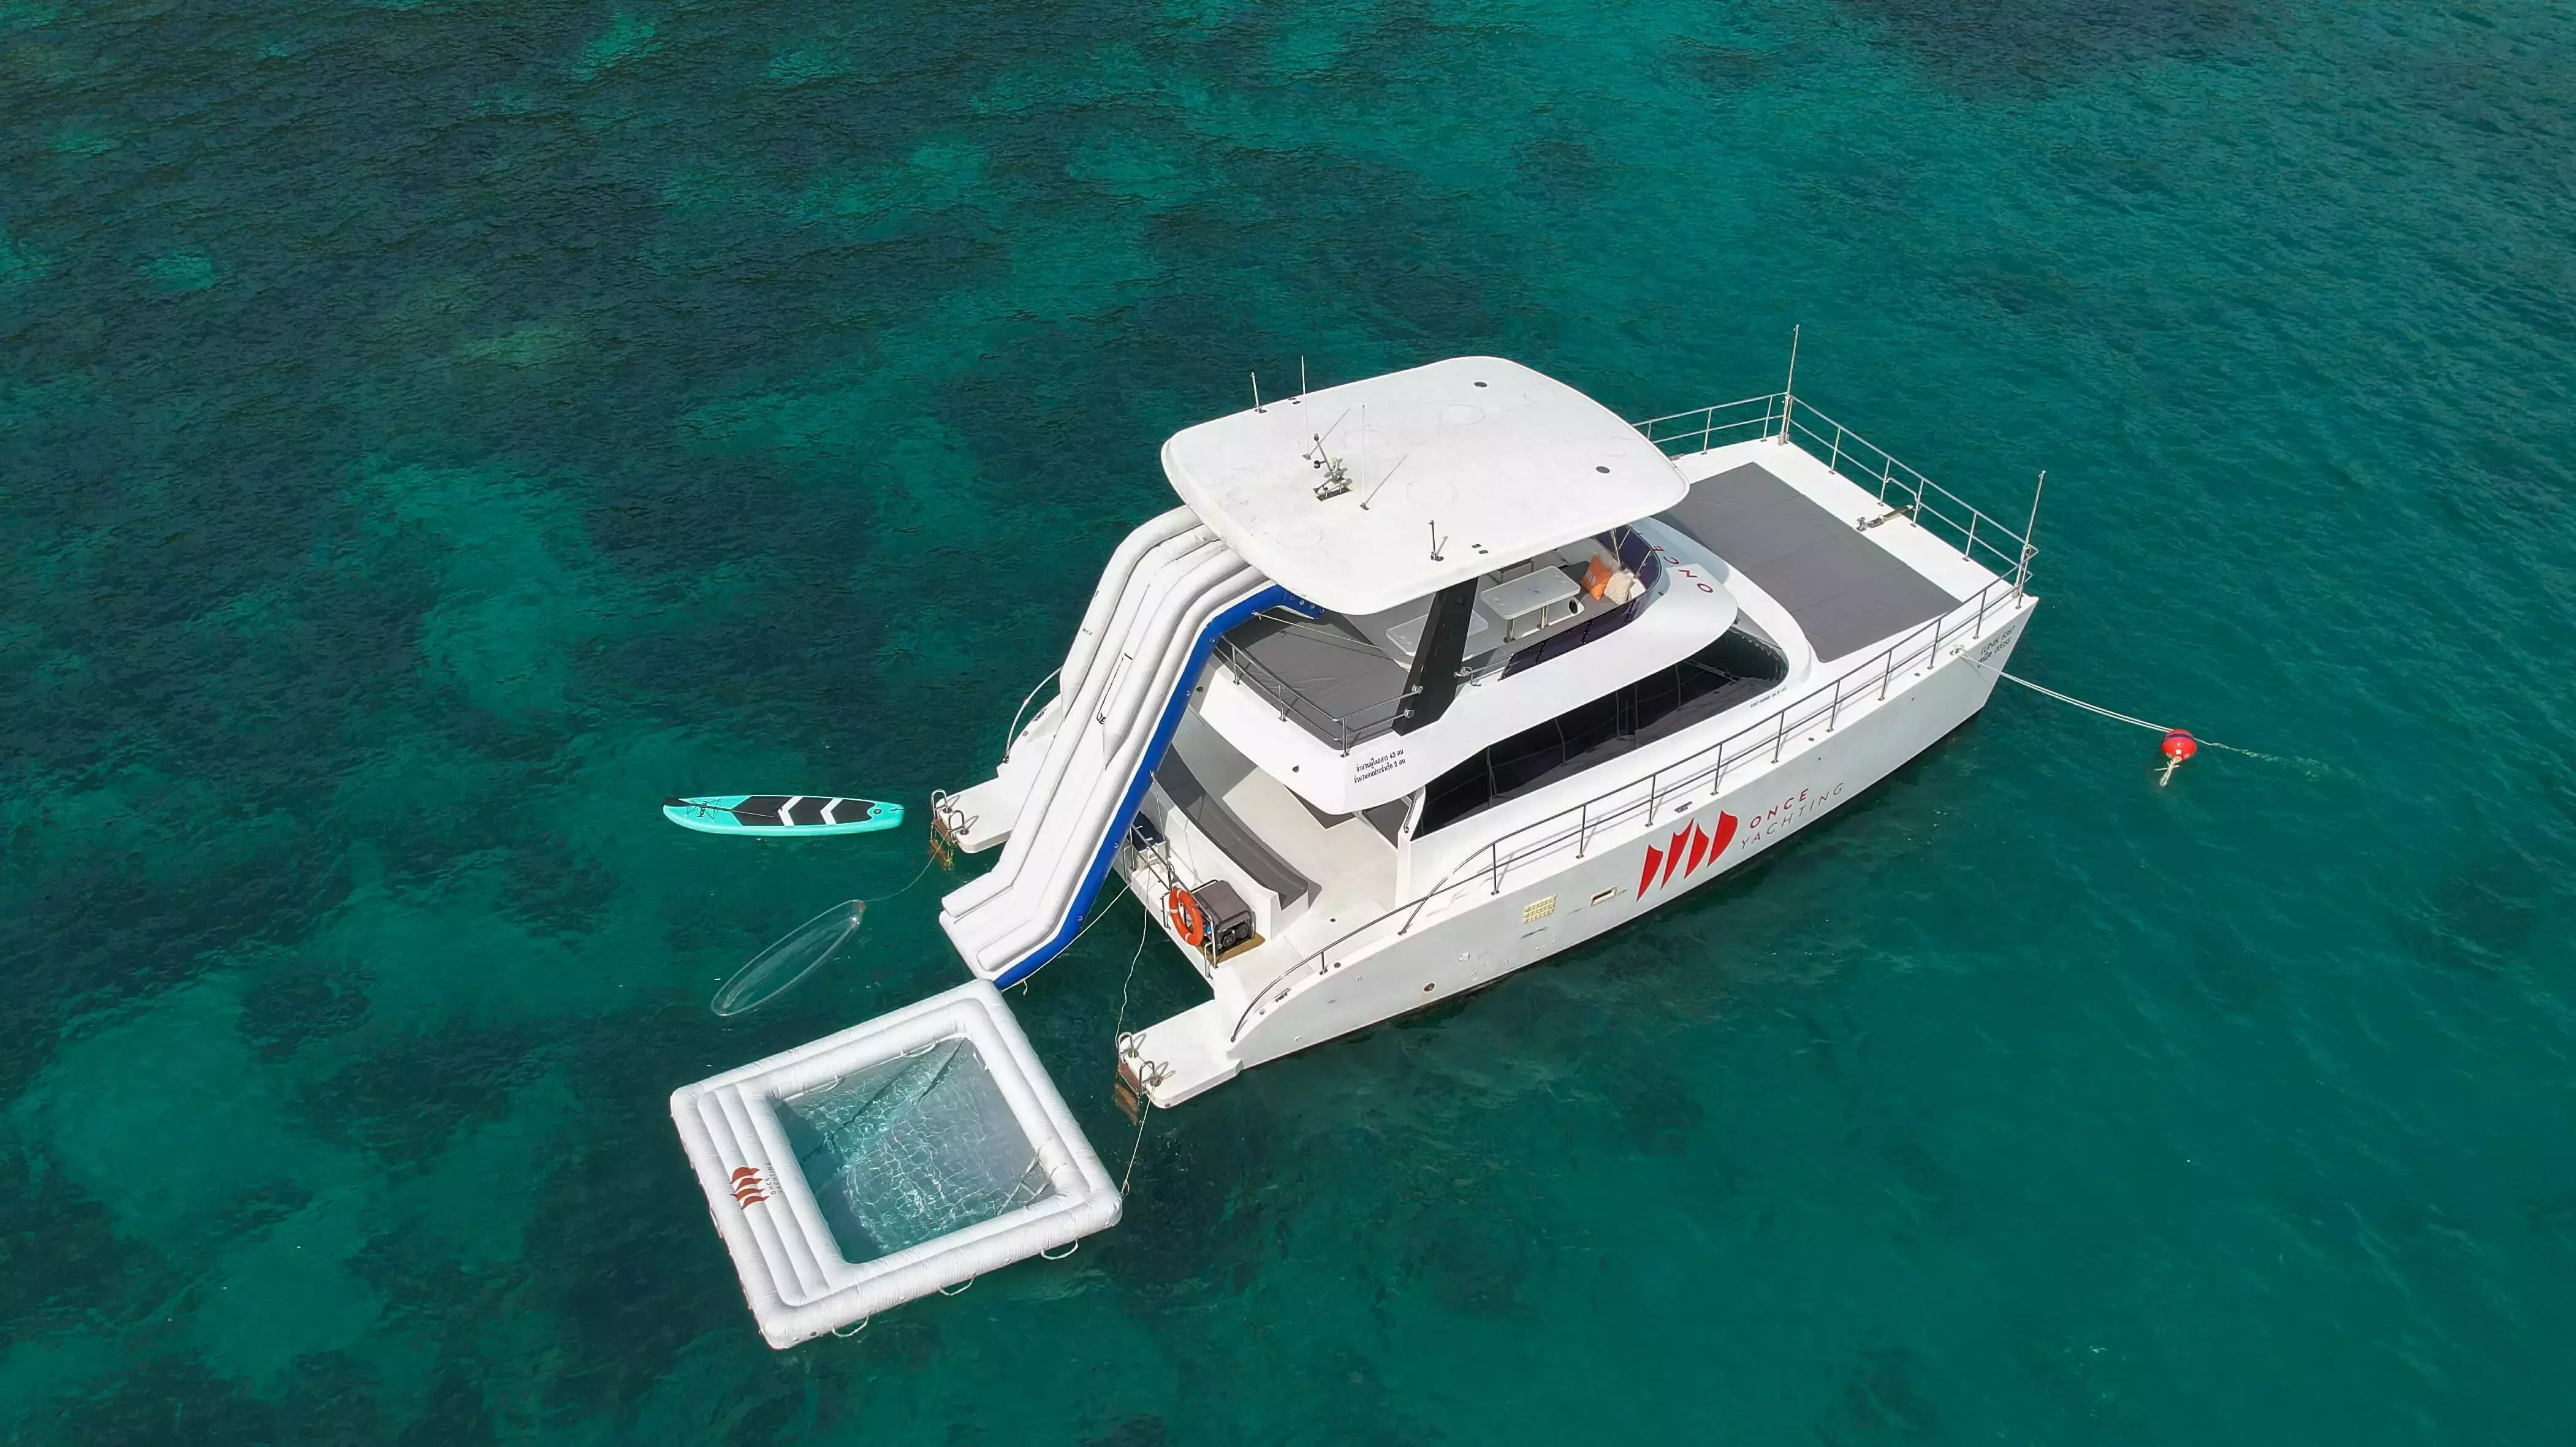 Lunik by Floeth - Top rates for a Charter of a private Power Catamaran in Thailand